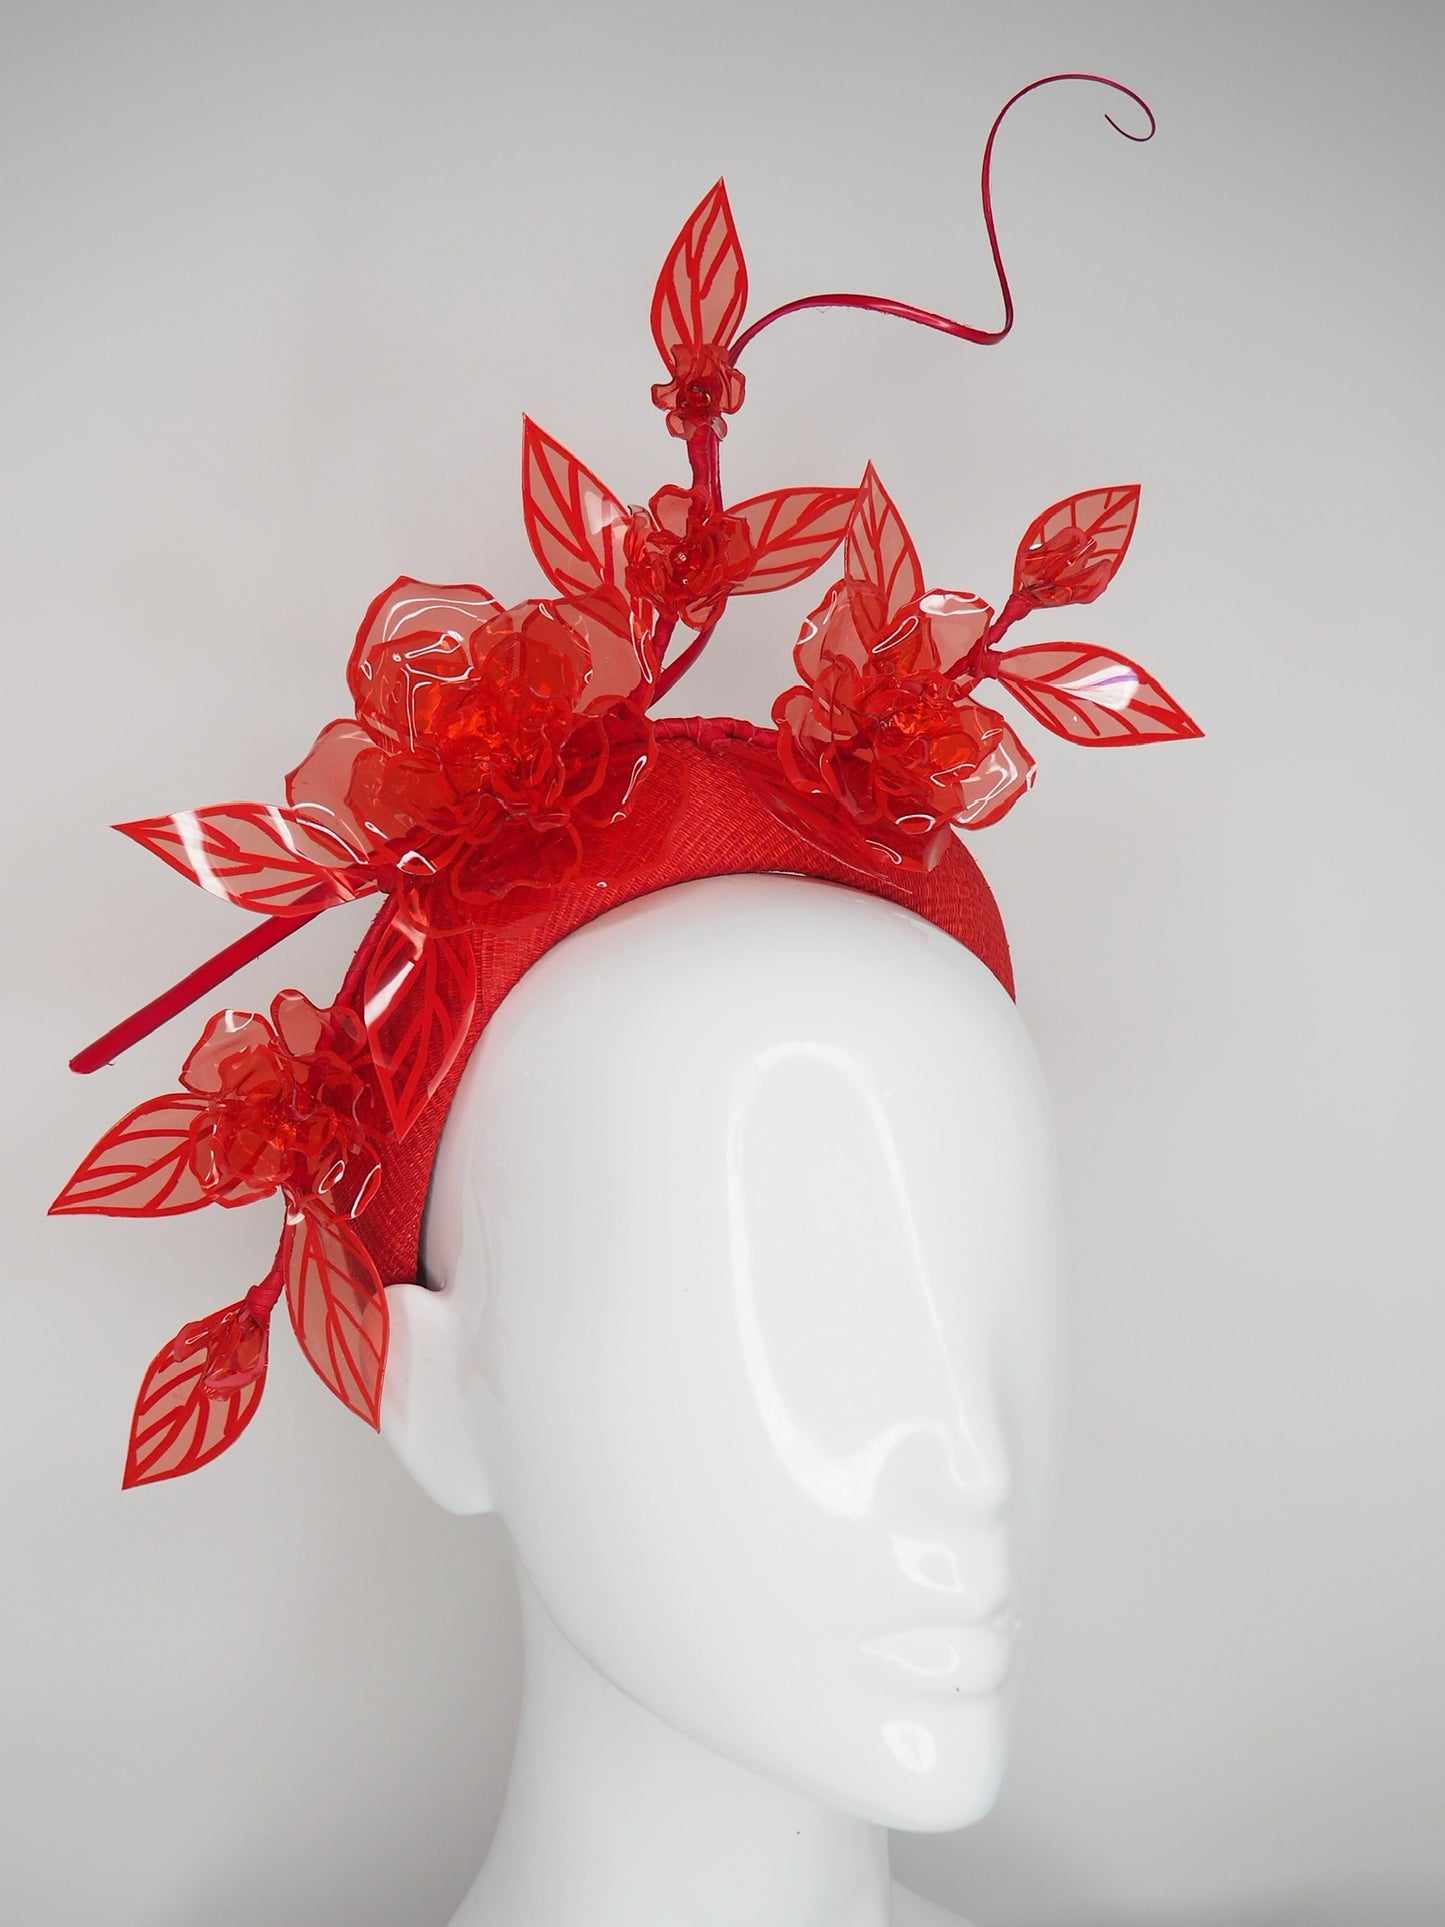 Roses are Red - Red 3d headband with translucent rose vine